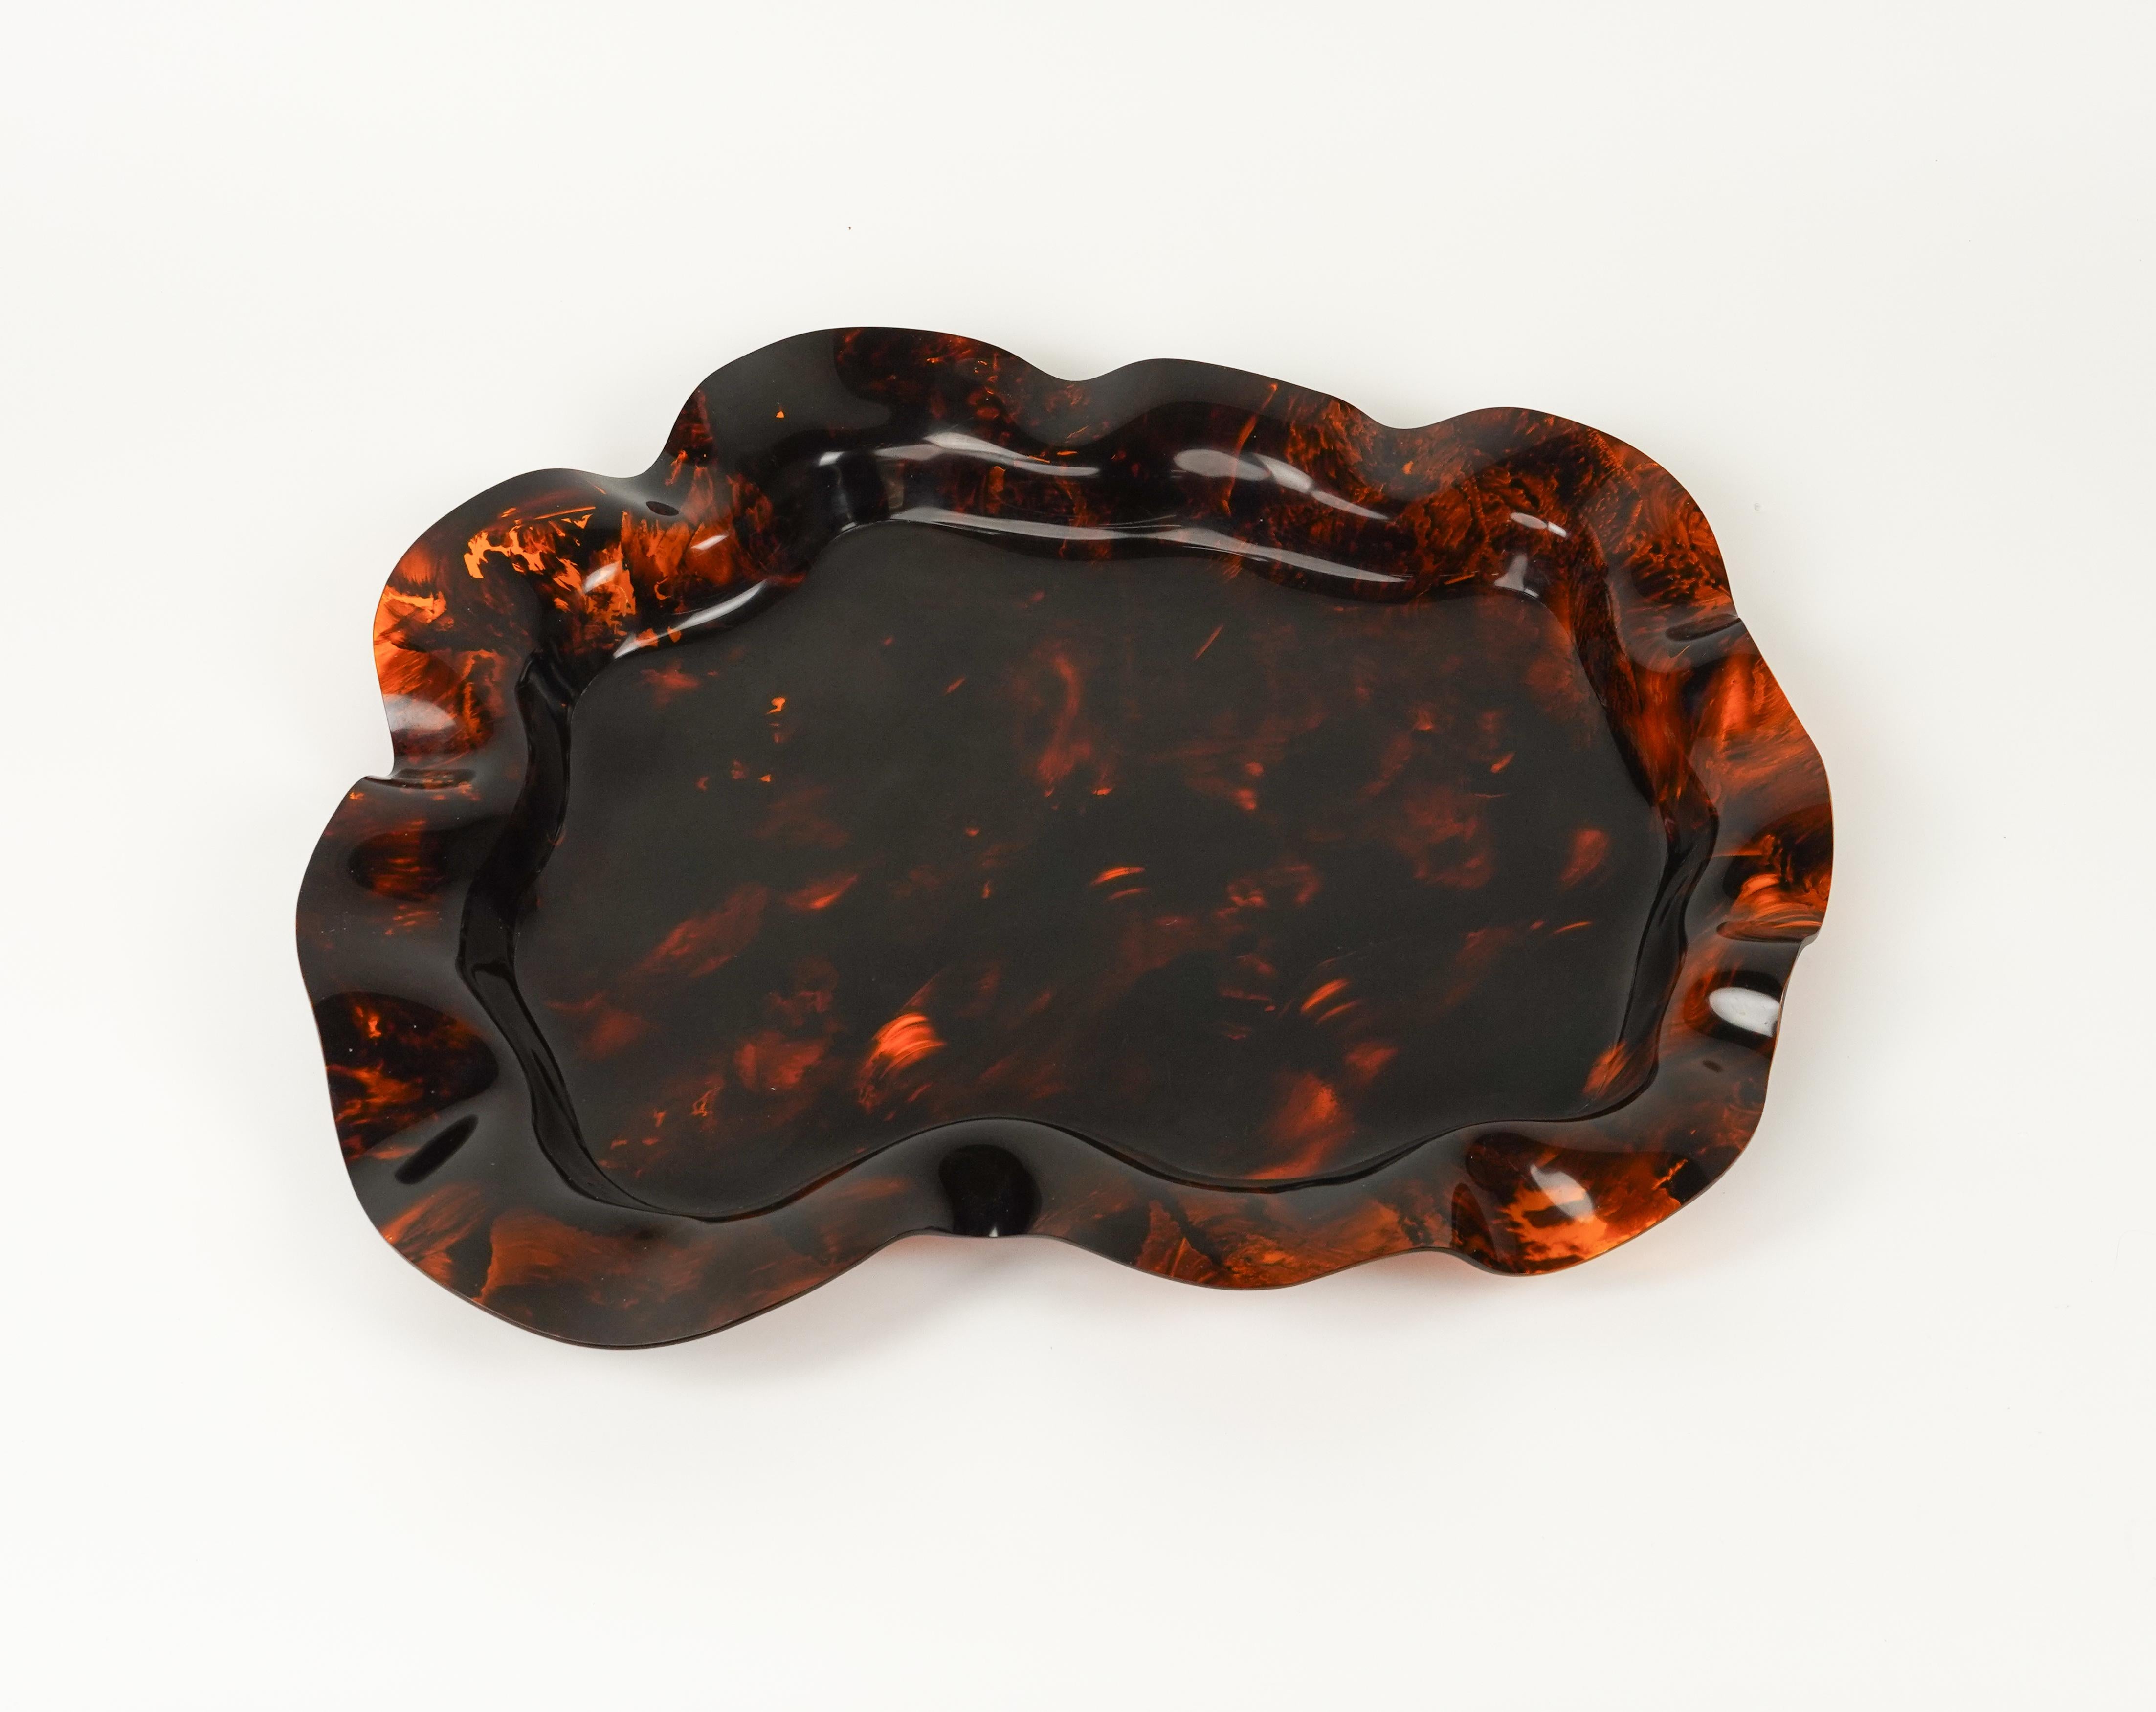 Large Serving Tray or Centerpiece Lucite Faux Tortoiseshell, Italy 1970s For Sale 9